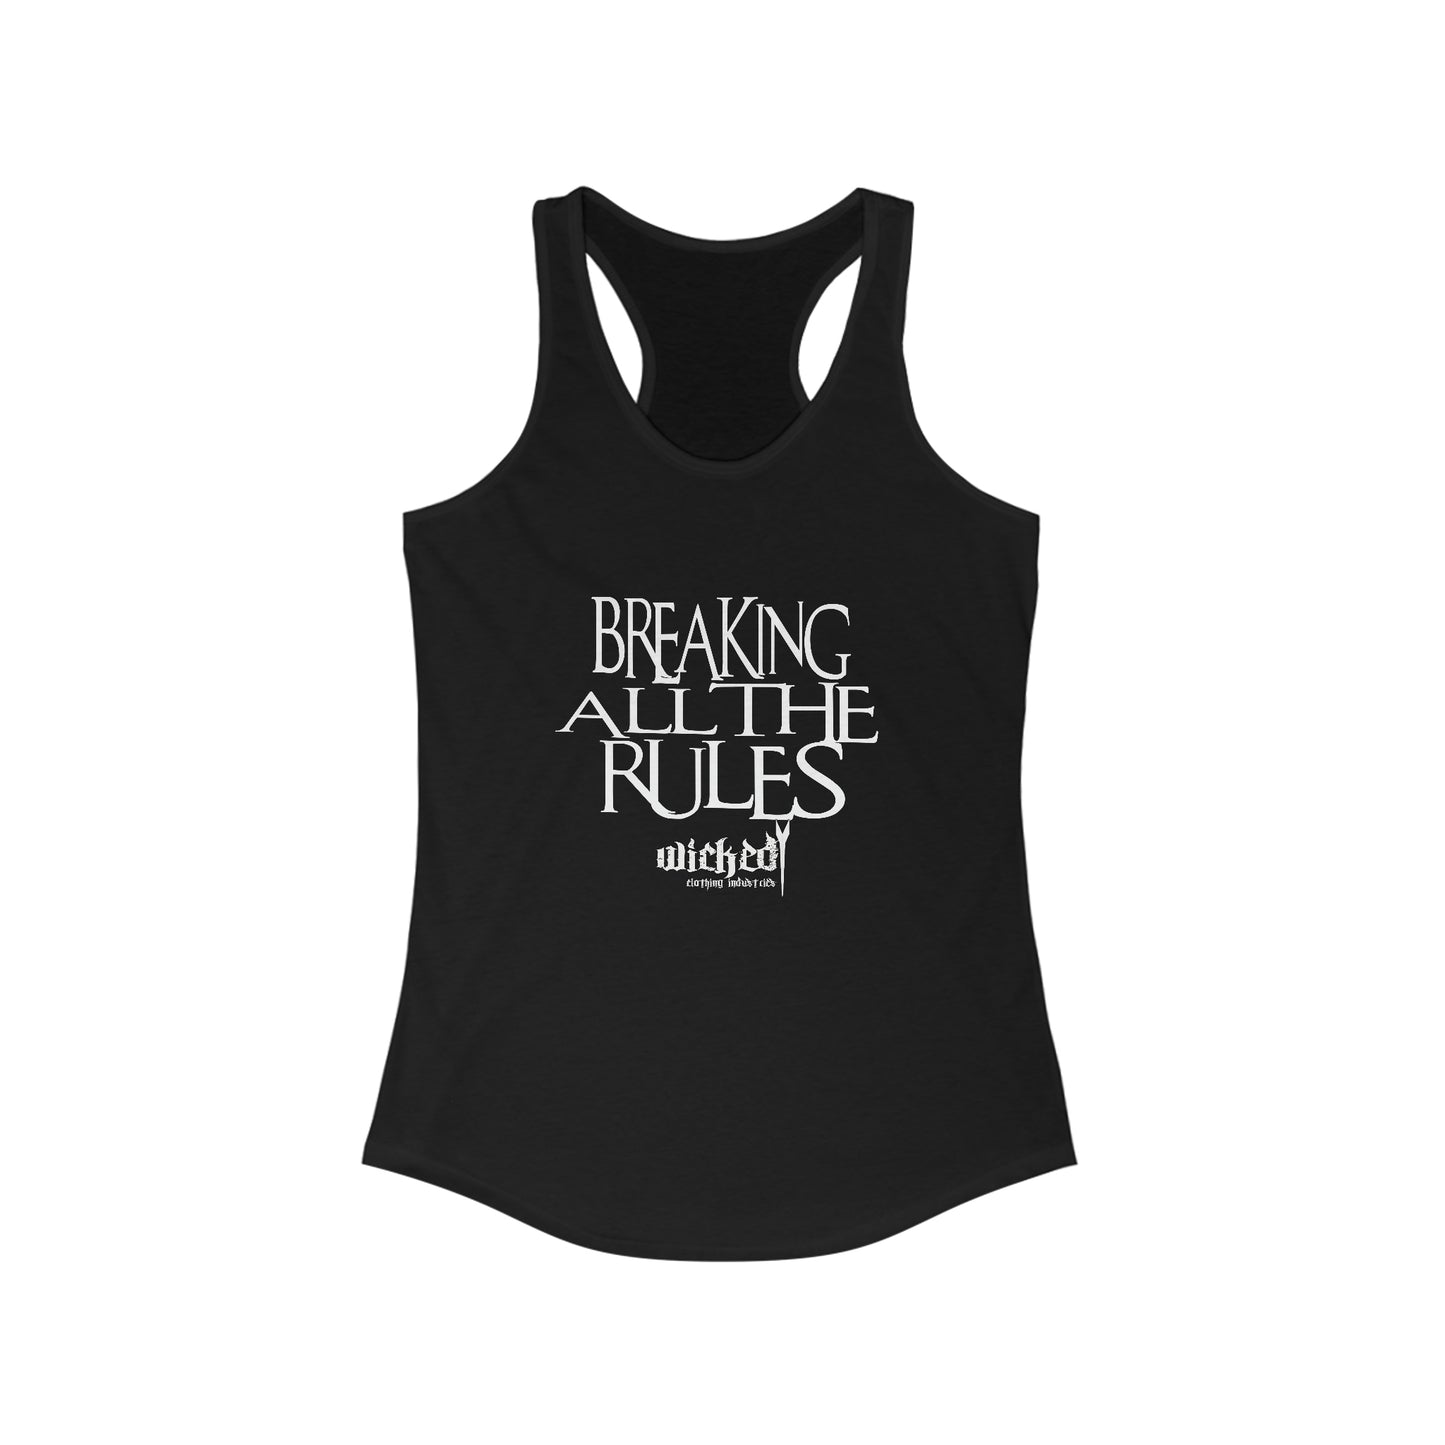 Breaking All The Rules/ Black Racerback Tank Top